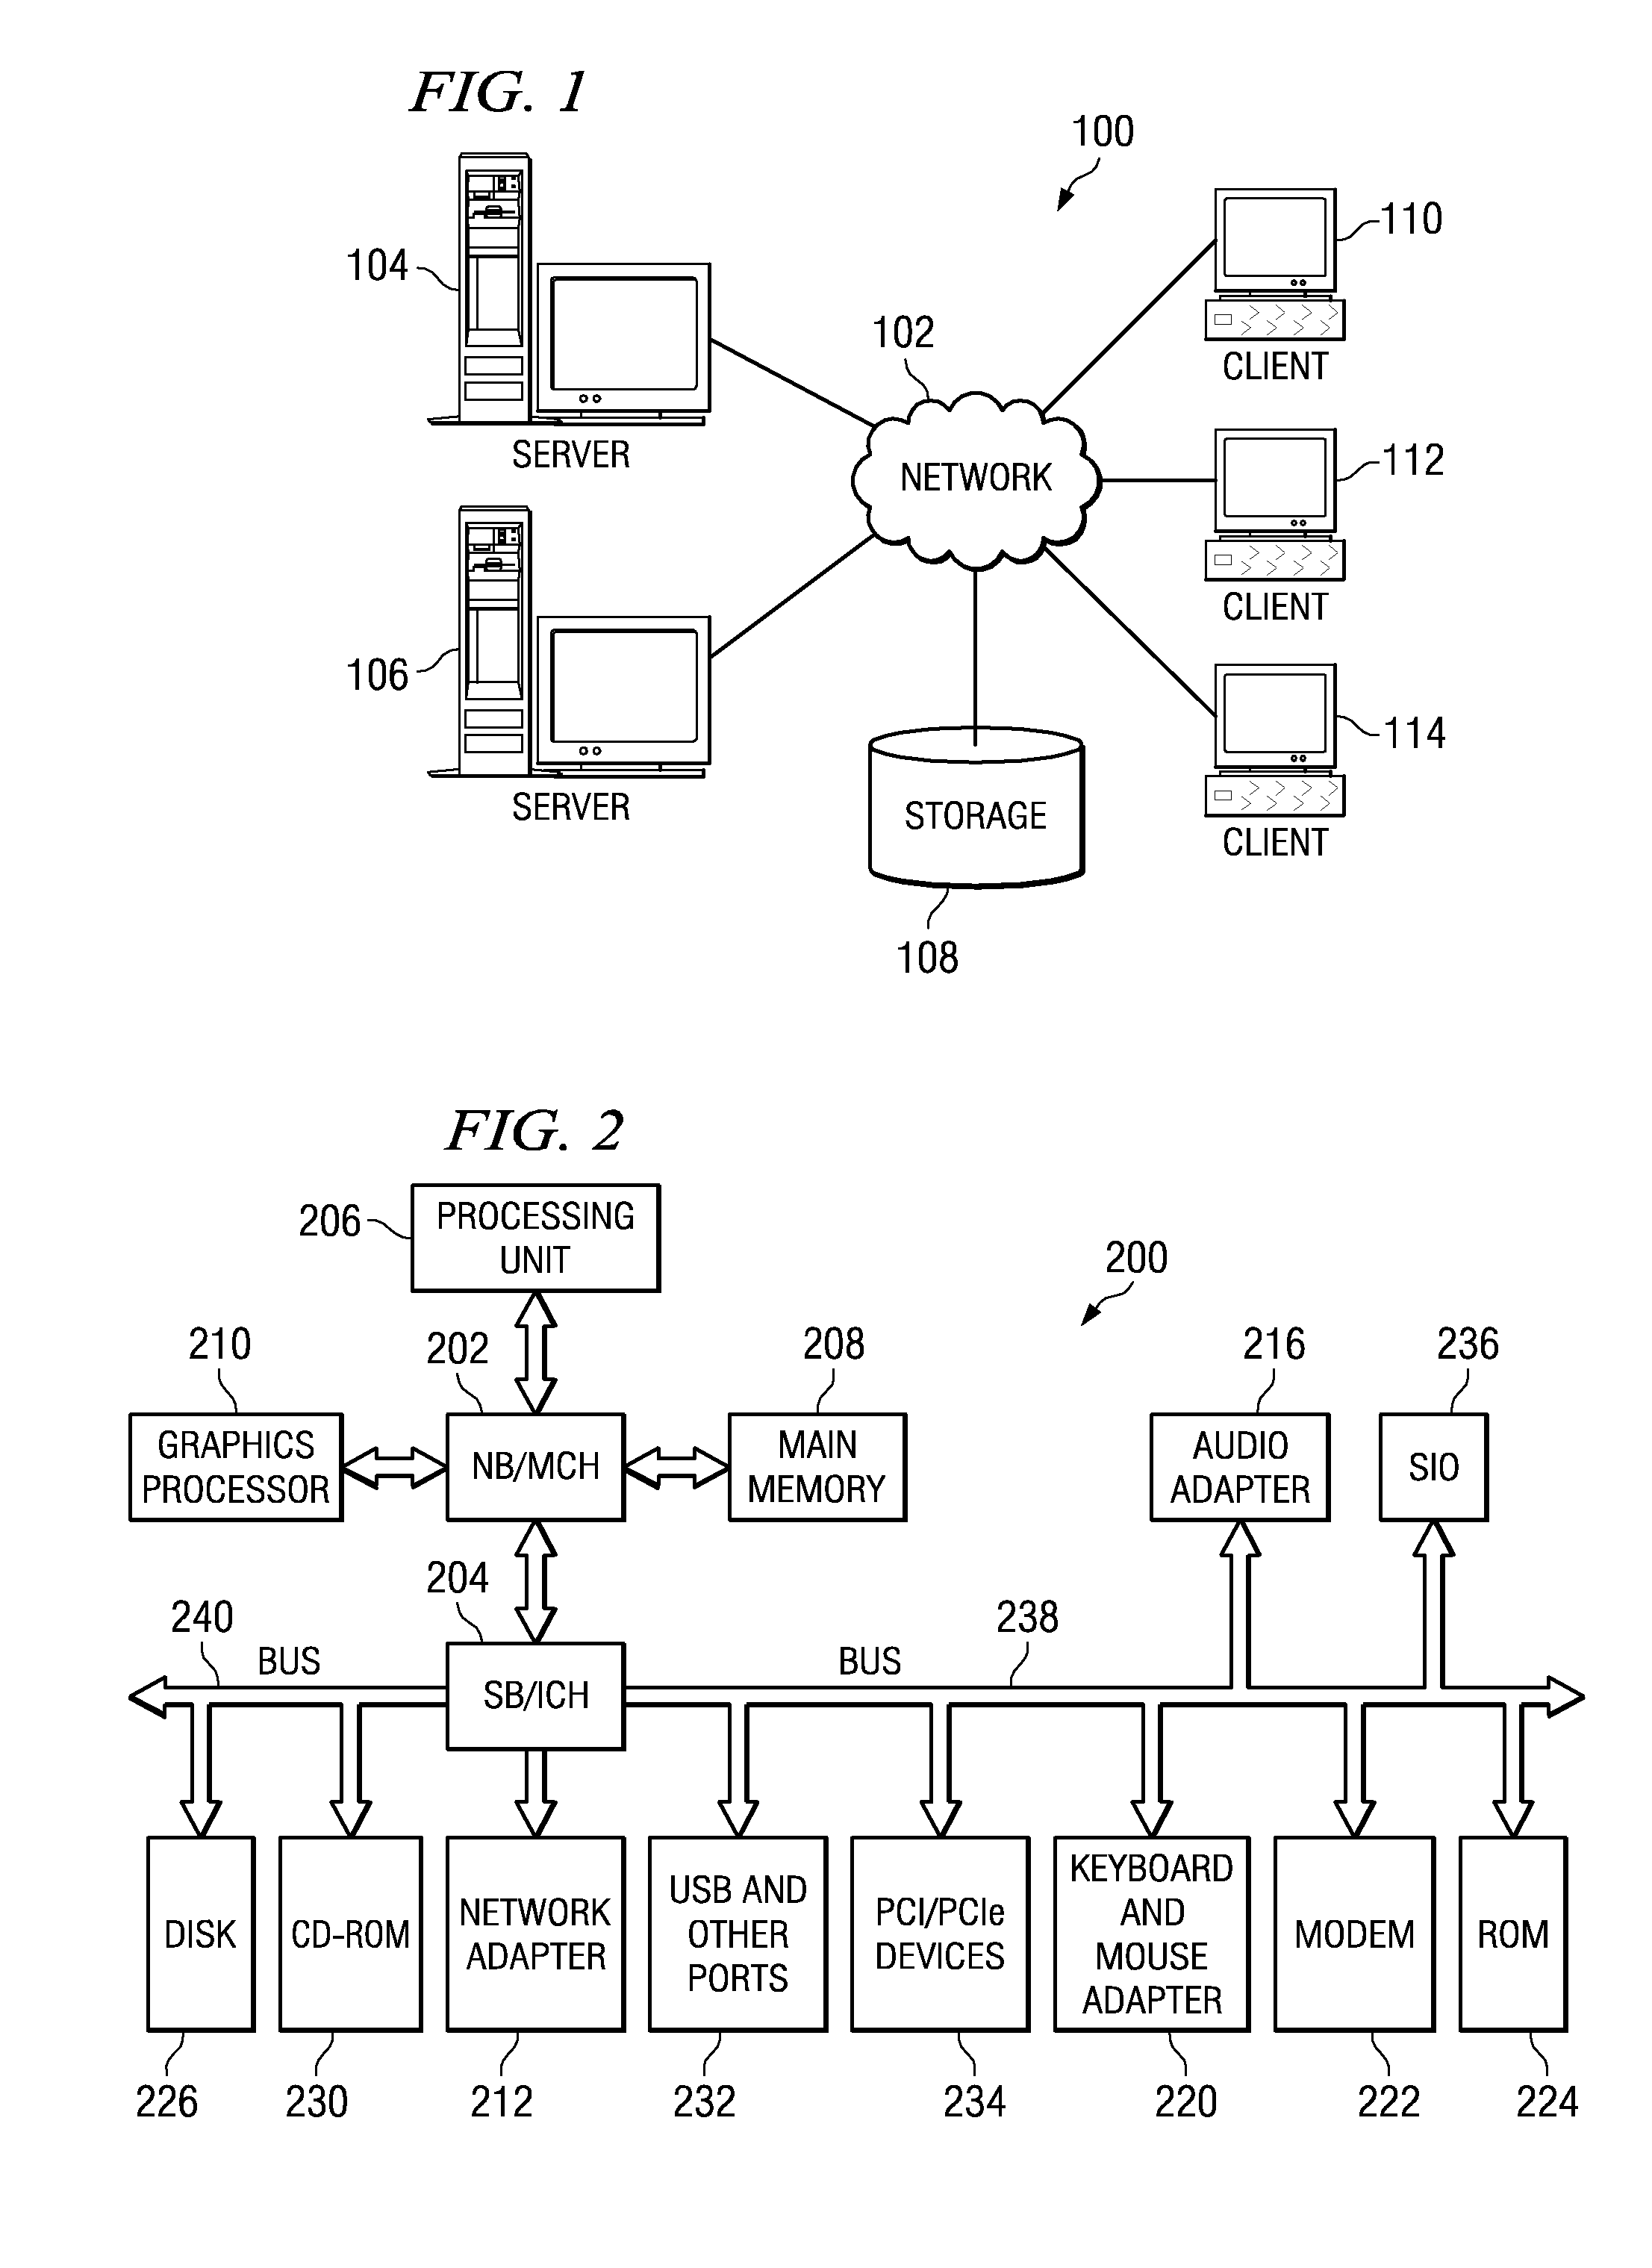 System and Method for Multi-Level Security Filtering of Model Representations